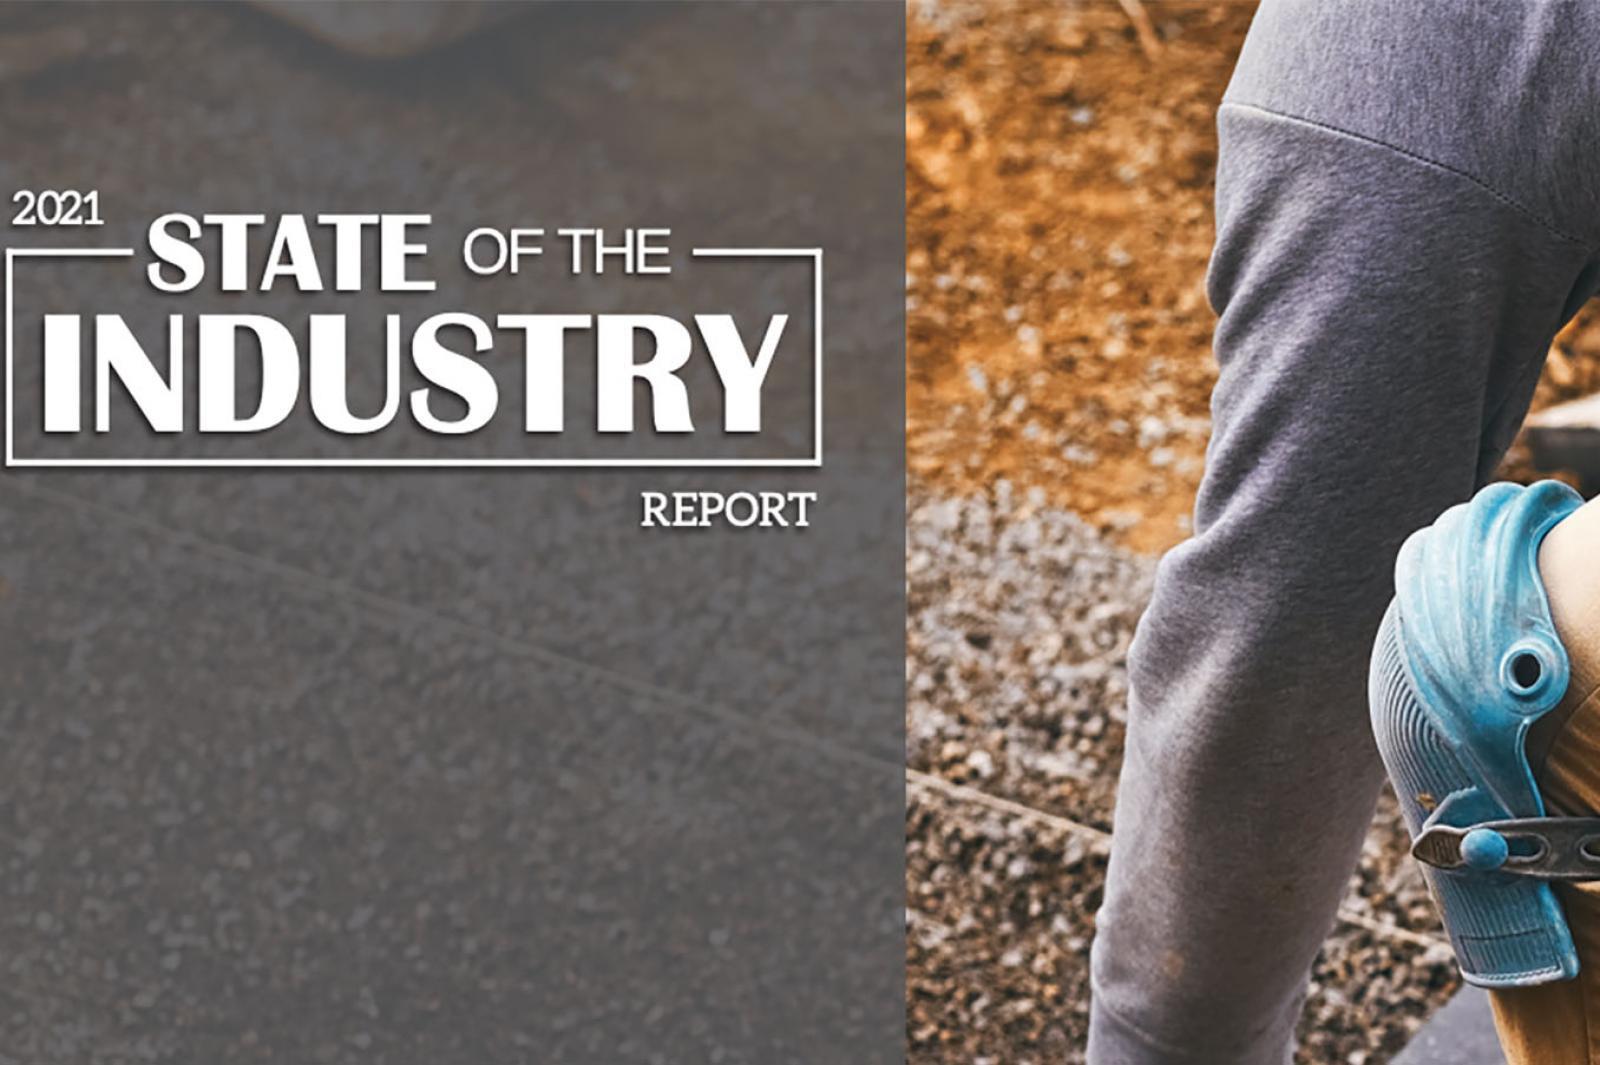 2021 State of the Industry report